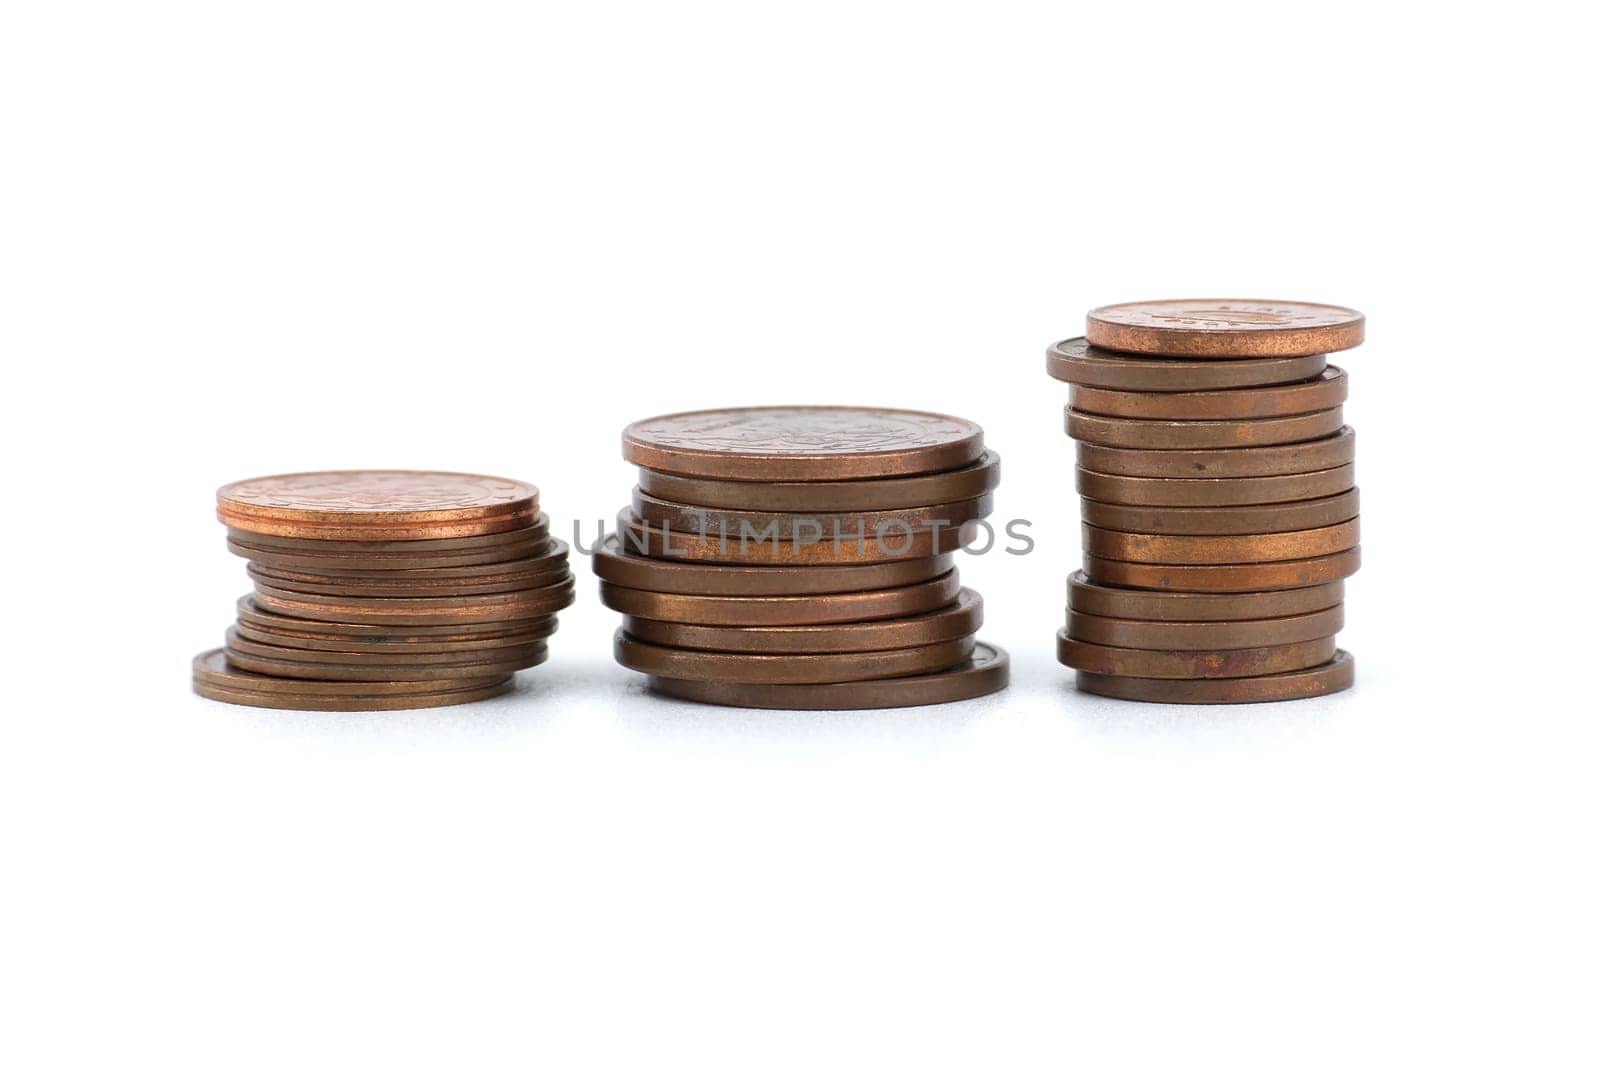 Stacks of coins ordered by size from largest to smallest and arranged from left to right isolated on white background